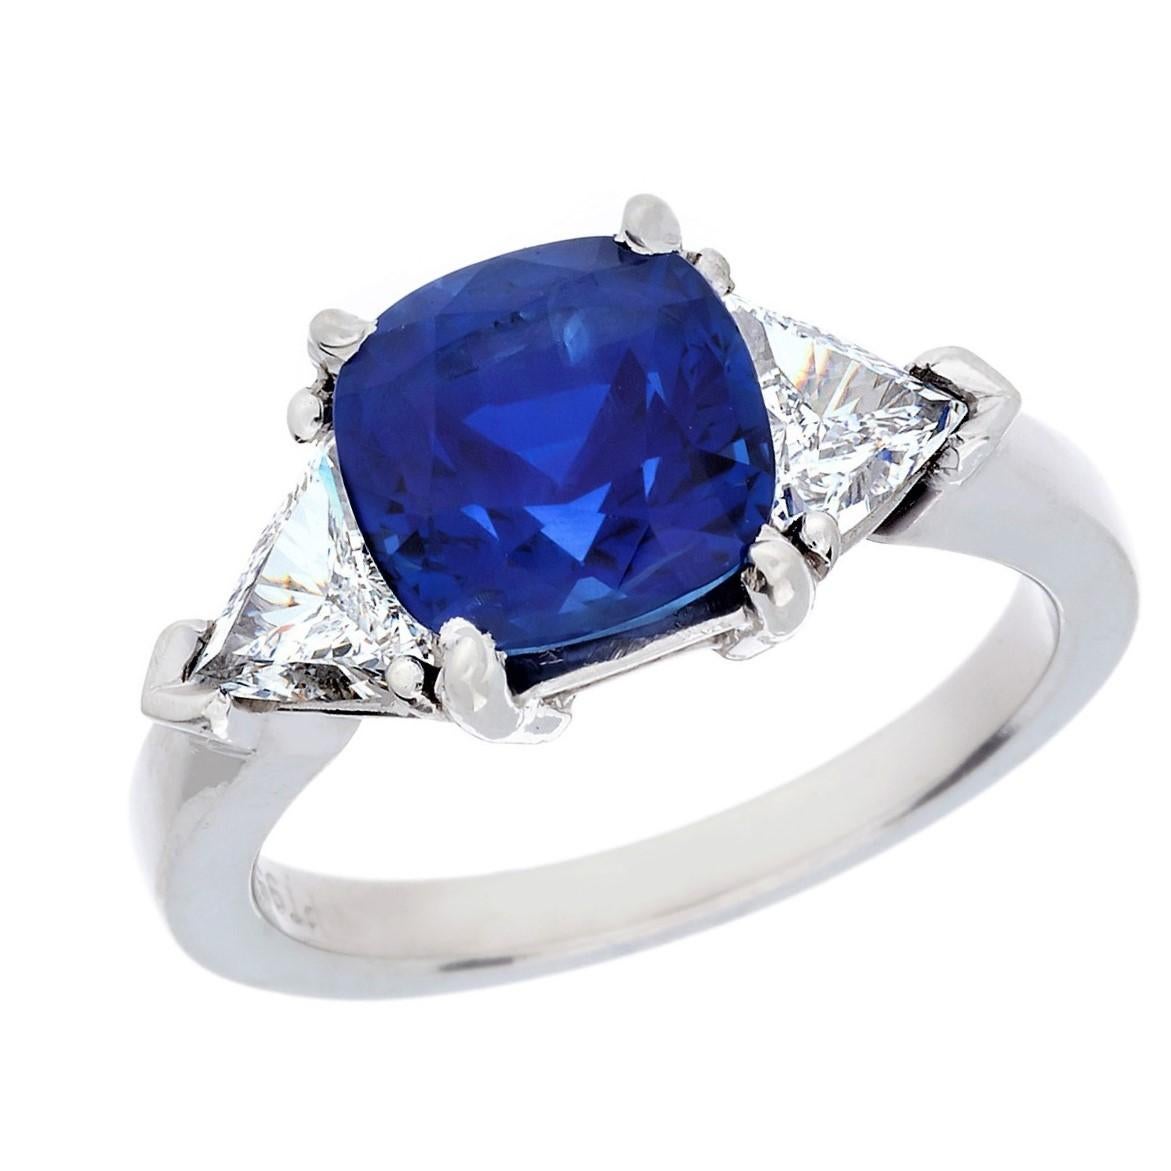 Platinum Burma Blue Sapphire and Diamomnd 3-Stone Ring, The sapphire is a cushion shape with 2-side trillion cut diamonds to total 0.69 carats.  The hand made mounting is stamped 950 Pt.
The amazing Royal Blue color is amazing. 
Finger Size: 6.5